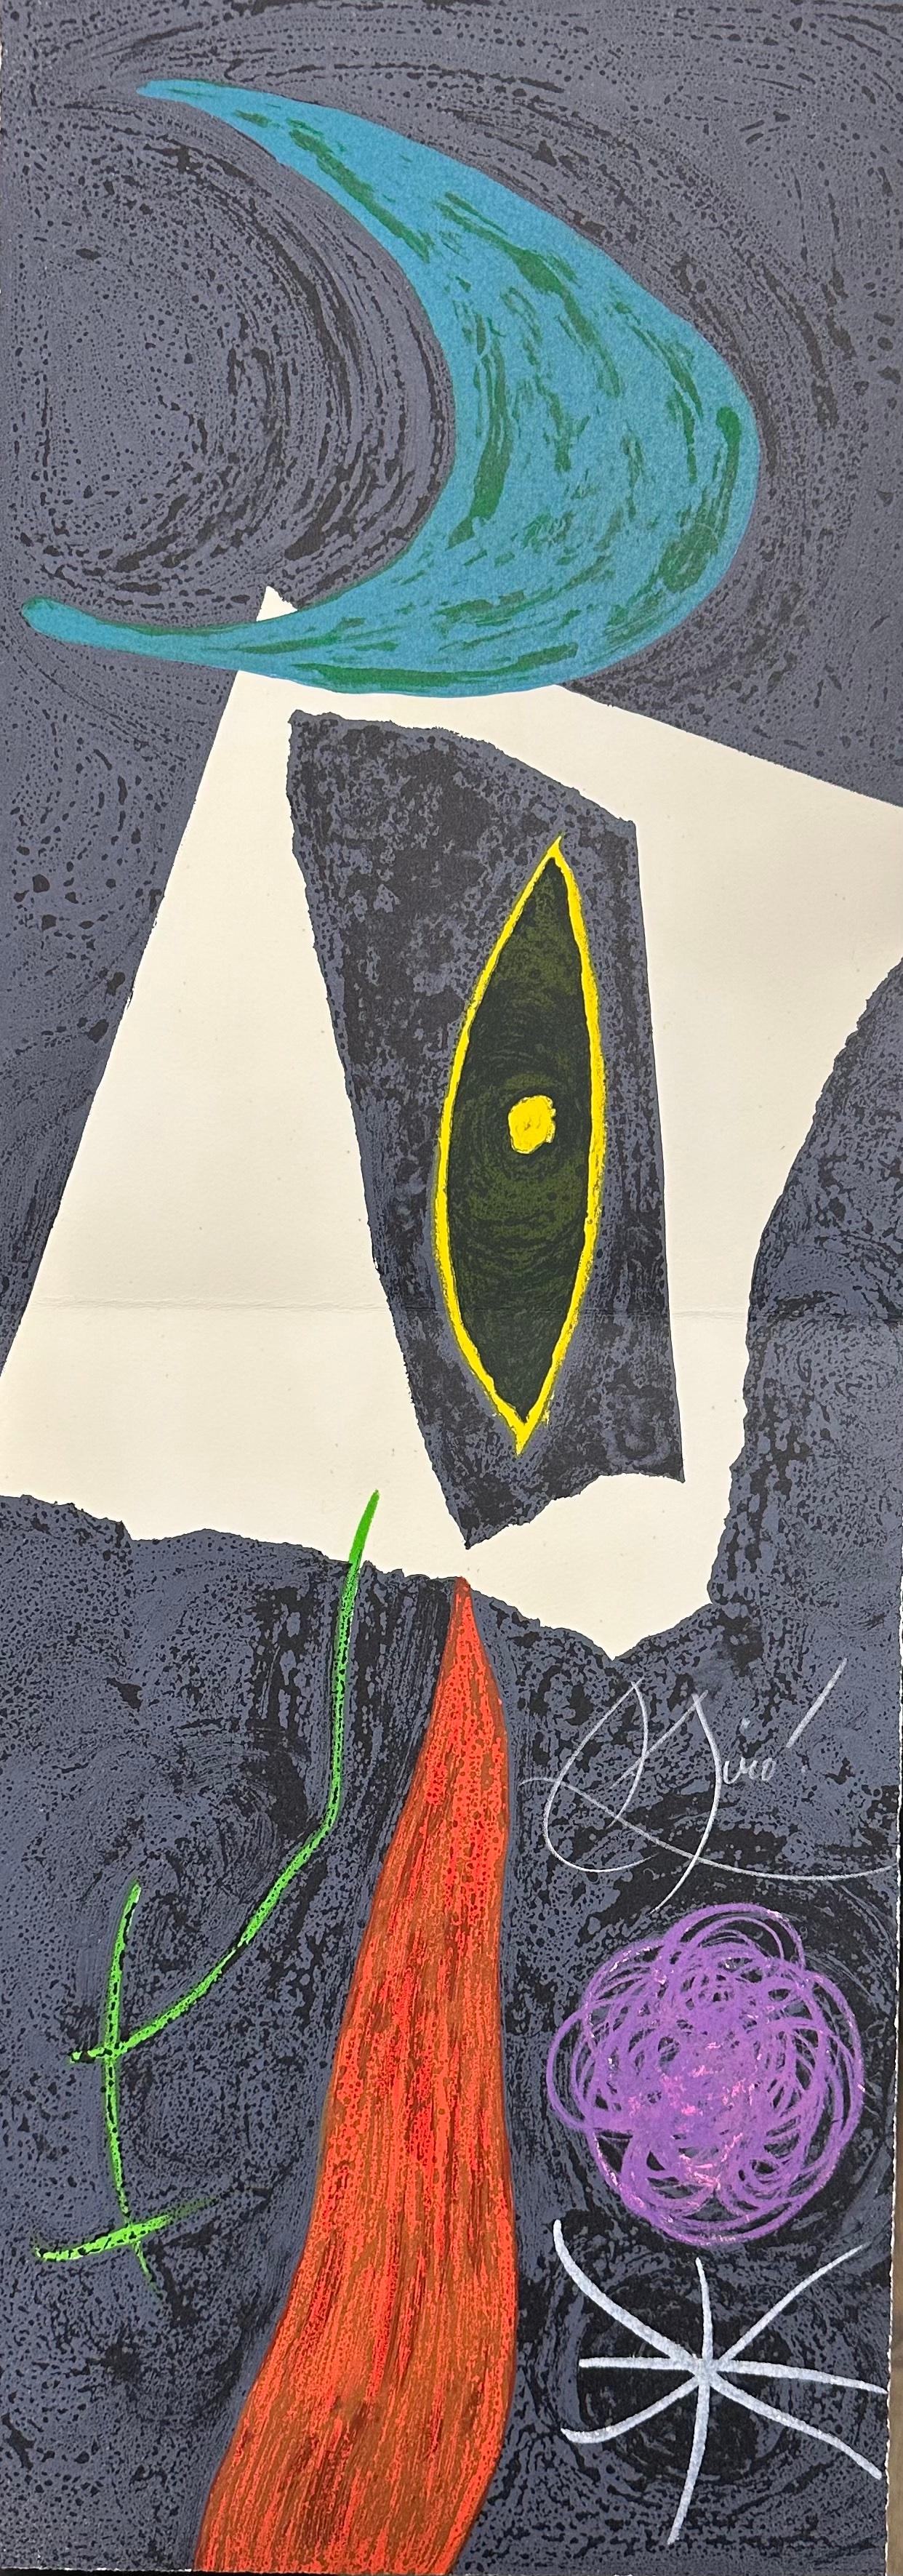 Joan Miró
M.987 from " Les Pénaltiés de l'enfer ou les Nouvelles-Hébrides"
1974
Hand signed in white crayon
From a signed edition of 50, annotated EA/50, folded (as issued)
Mourlot 987, Cramer bk.188 
29.5 x 10.5 inches (Vertical)
*Unframed